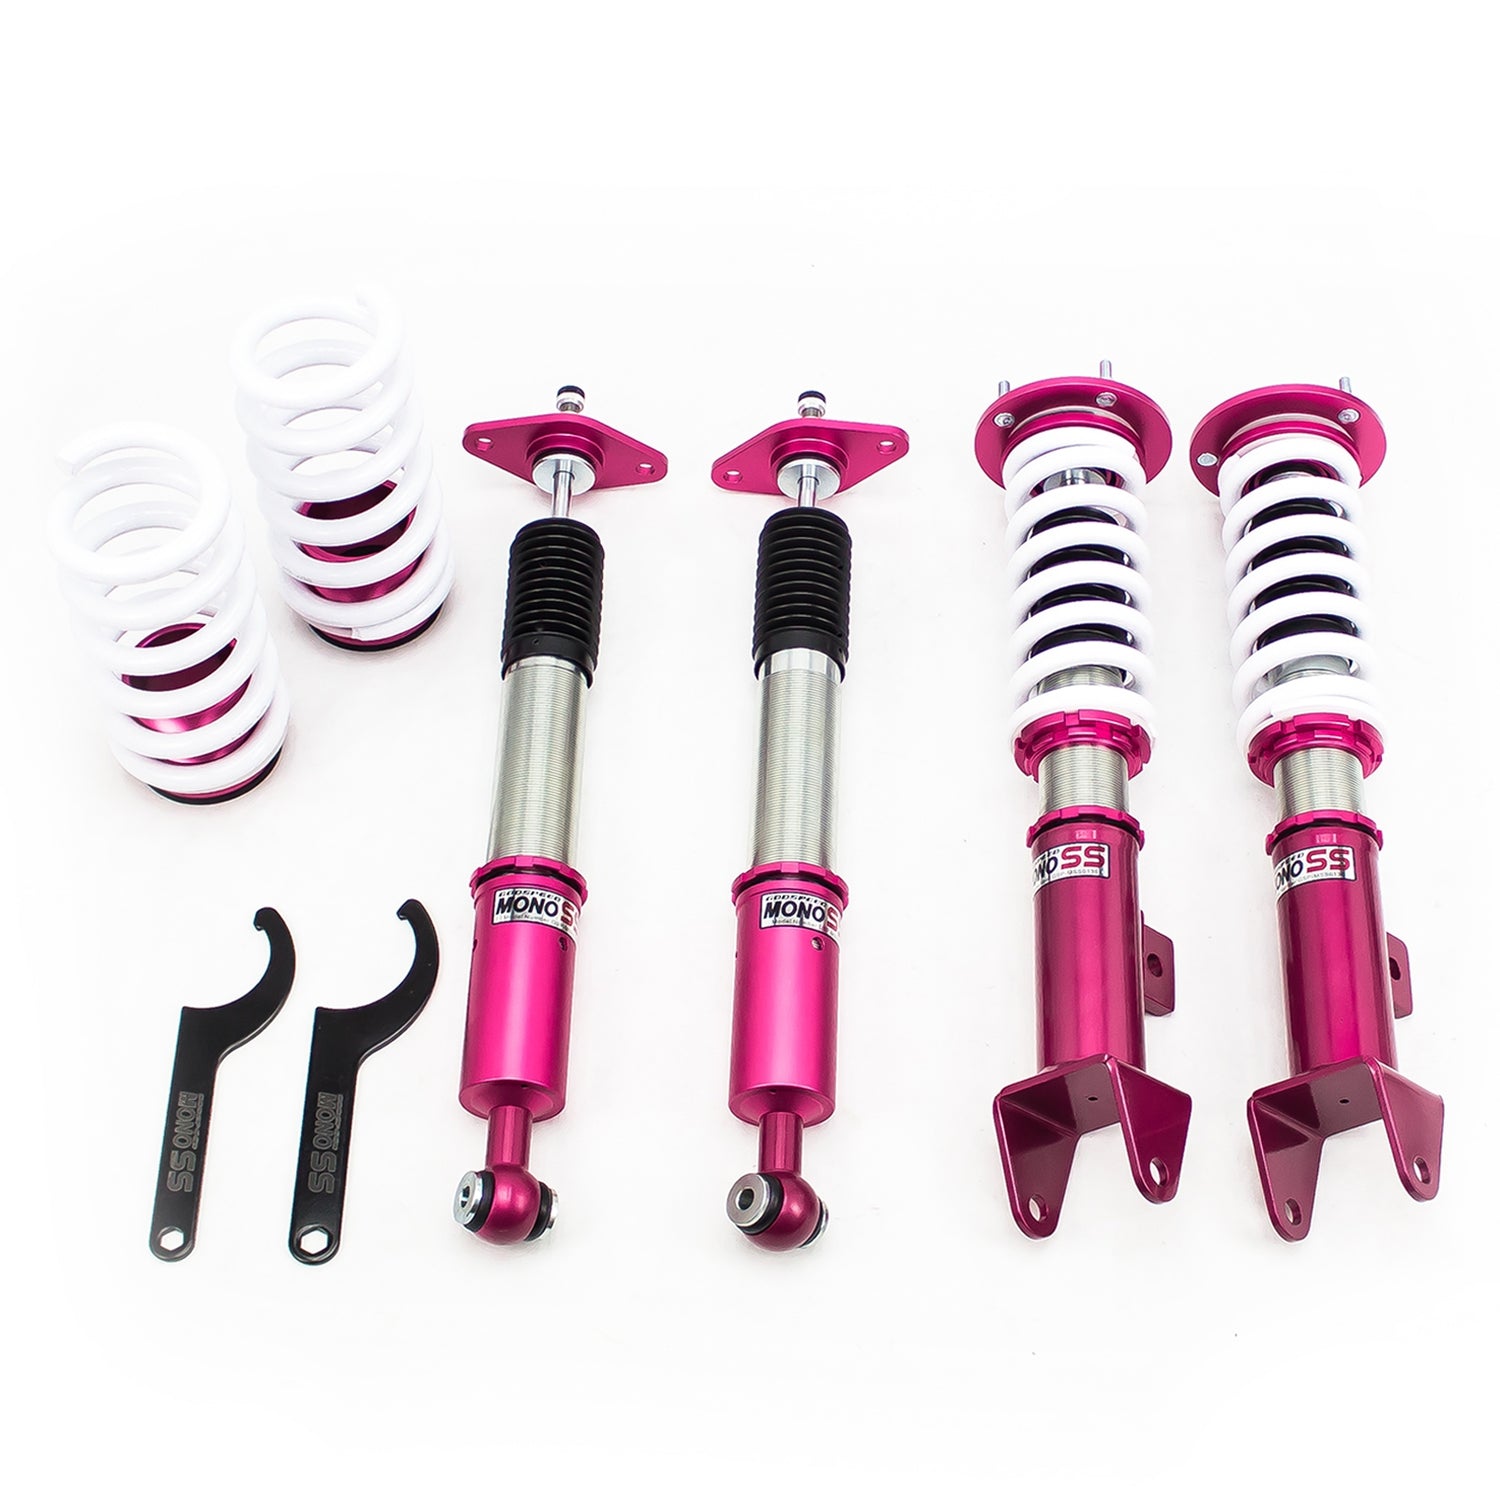 Godspeed MSS0136-A MonoSS Coilover Lowering Kit, Fully Adjustable, Ride Height, Spring Tension And 16 Click Damping, Chrysler 300C RWD 2011+UP